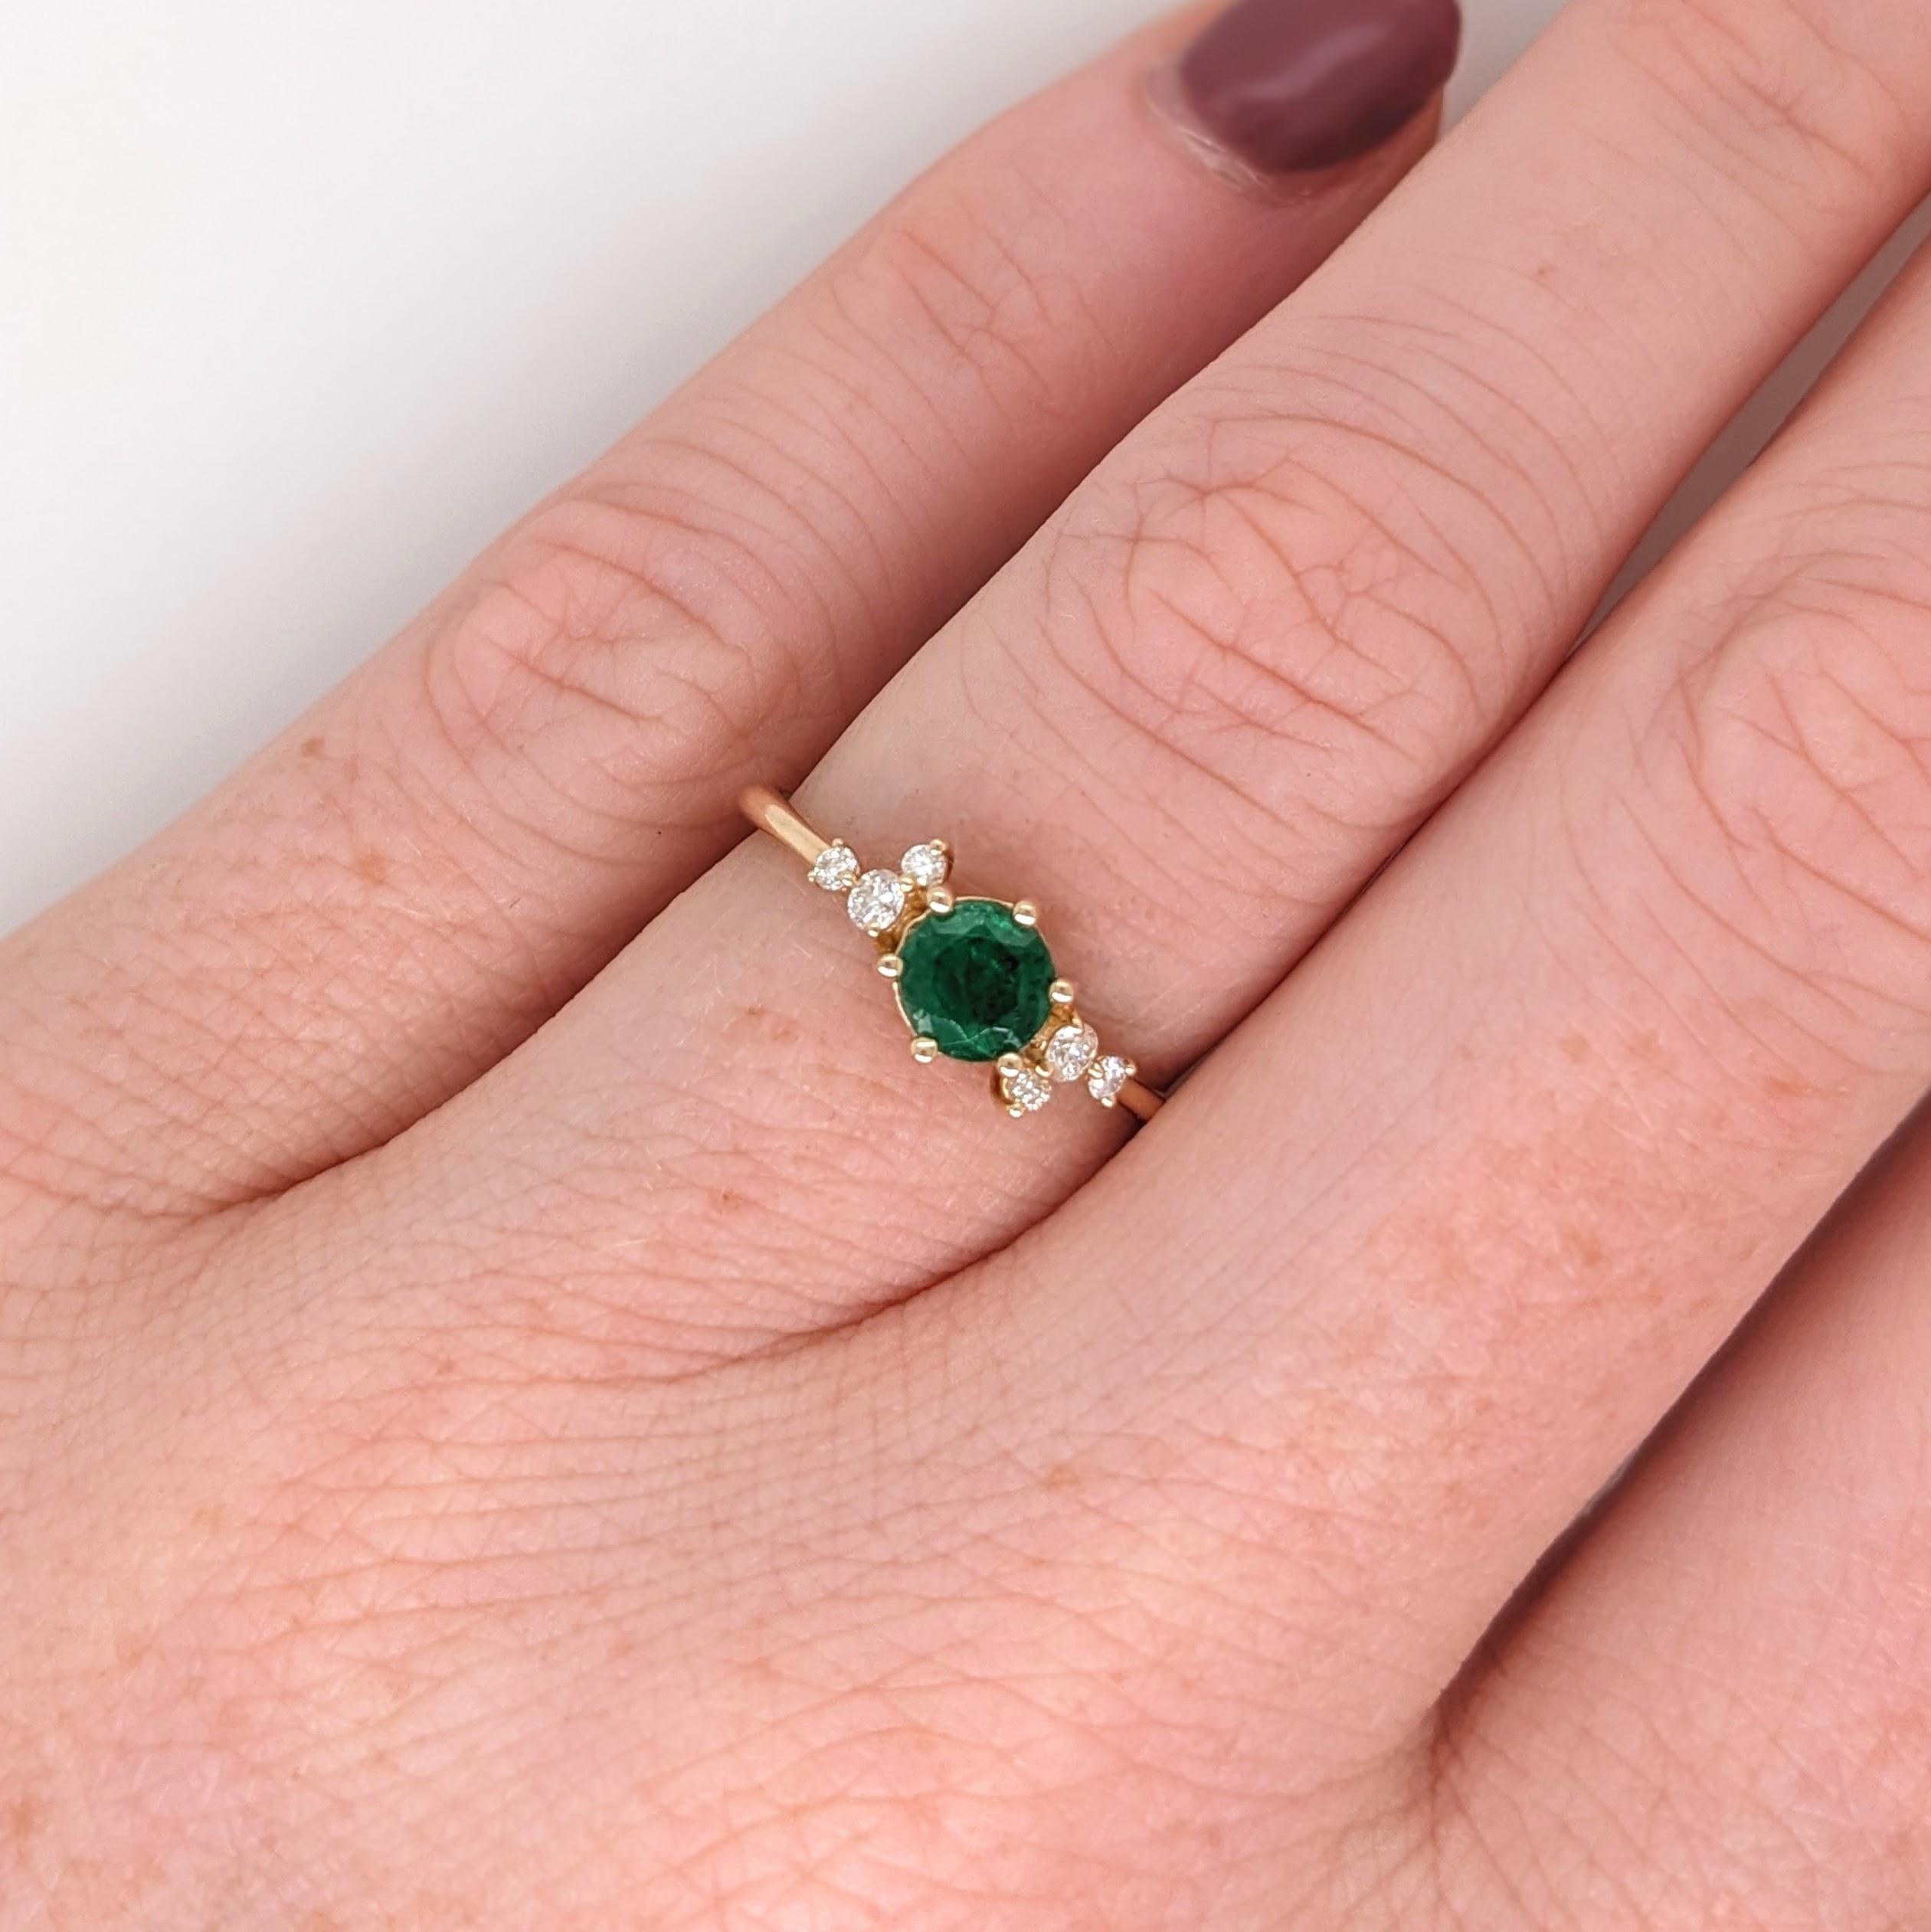 Green Emerald Ring w Natural Diamonds in Solid 14k Yellow Gold Round 5mm 1